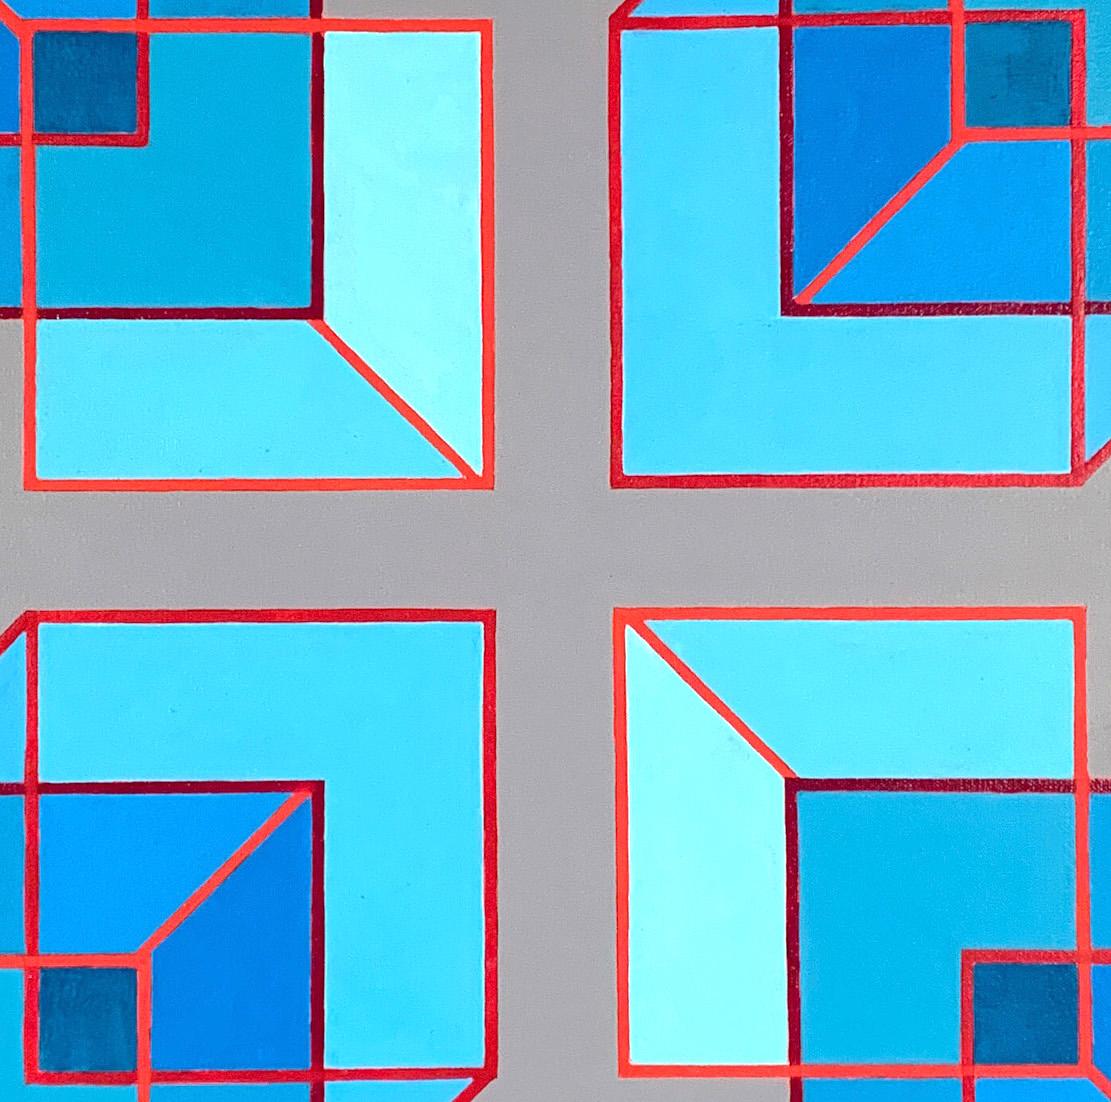 Expanded Cubes #1: geometric abstract Op Art Pop Art painting, blue, red & gray - Painting by Benjamin Weaver